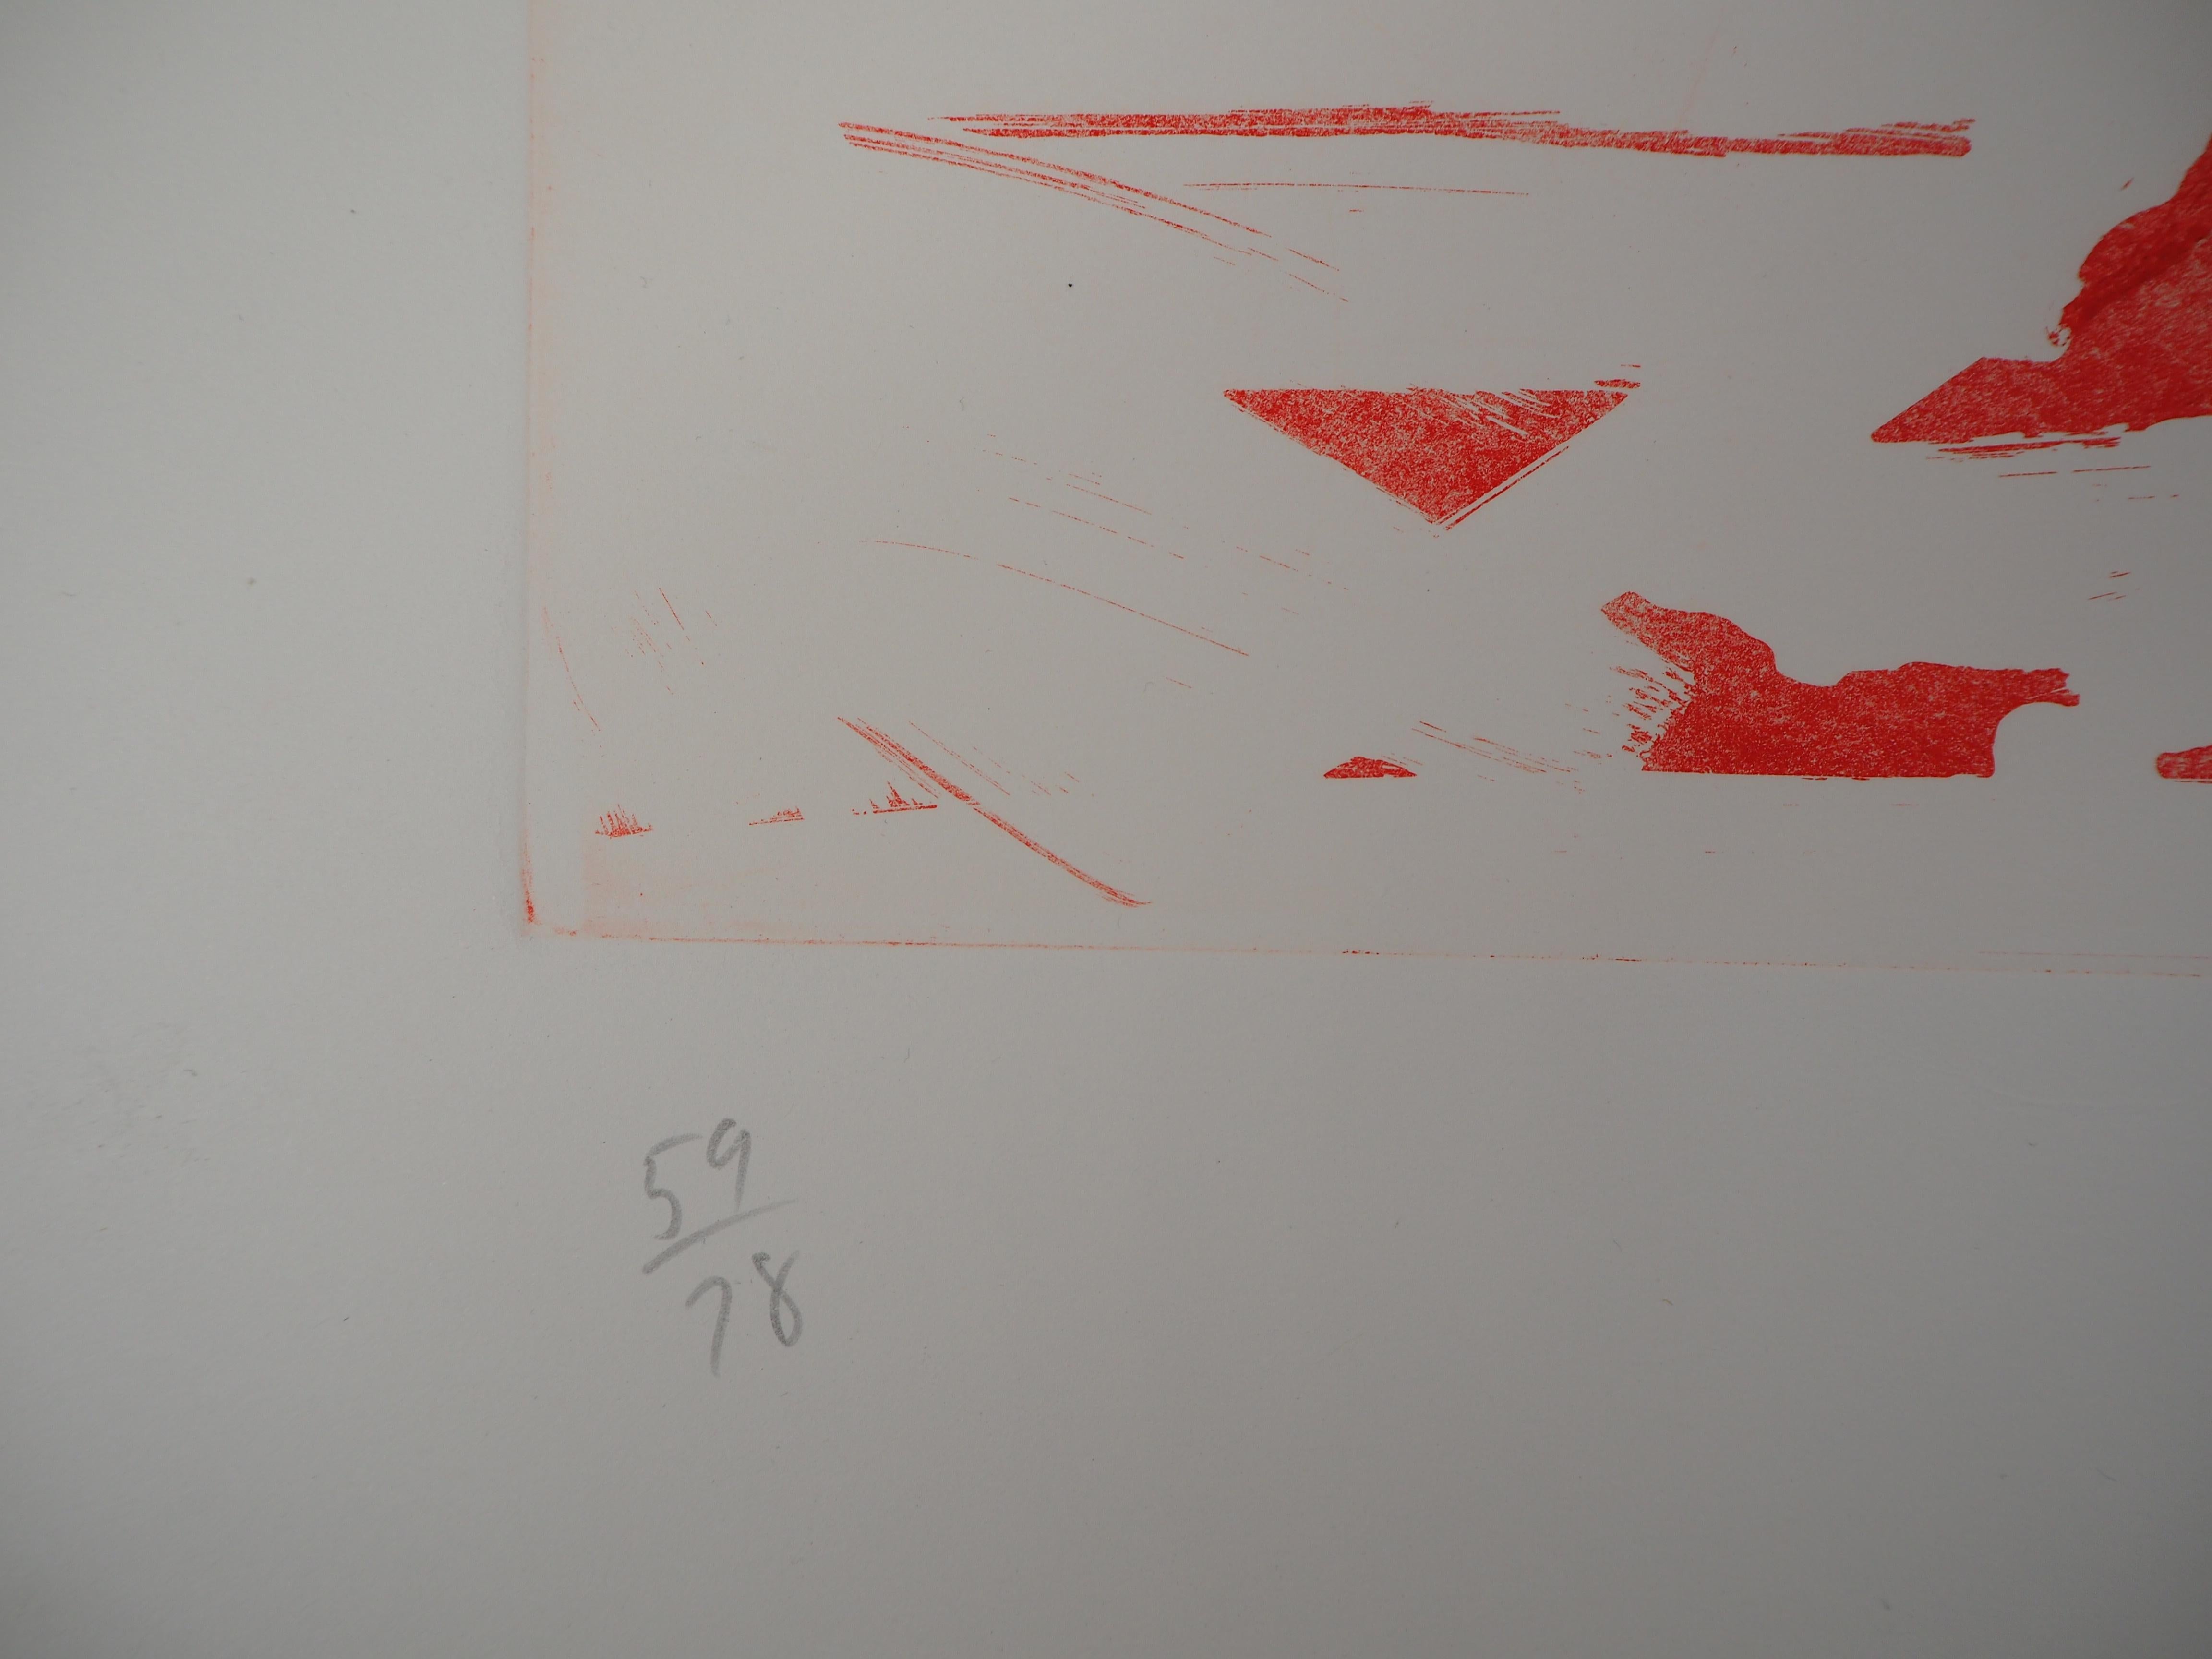 James ROSENQUIST 
Symbols, Star Leg, 1979

Original etching and aquatint
Handsigned in pencil by the artist
Numbered /78
On vellum 58 x 100 cm (c. 23 x 40 in)

Excellent condition